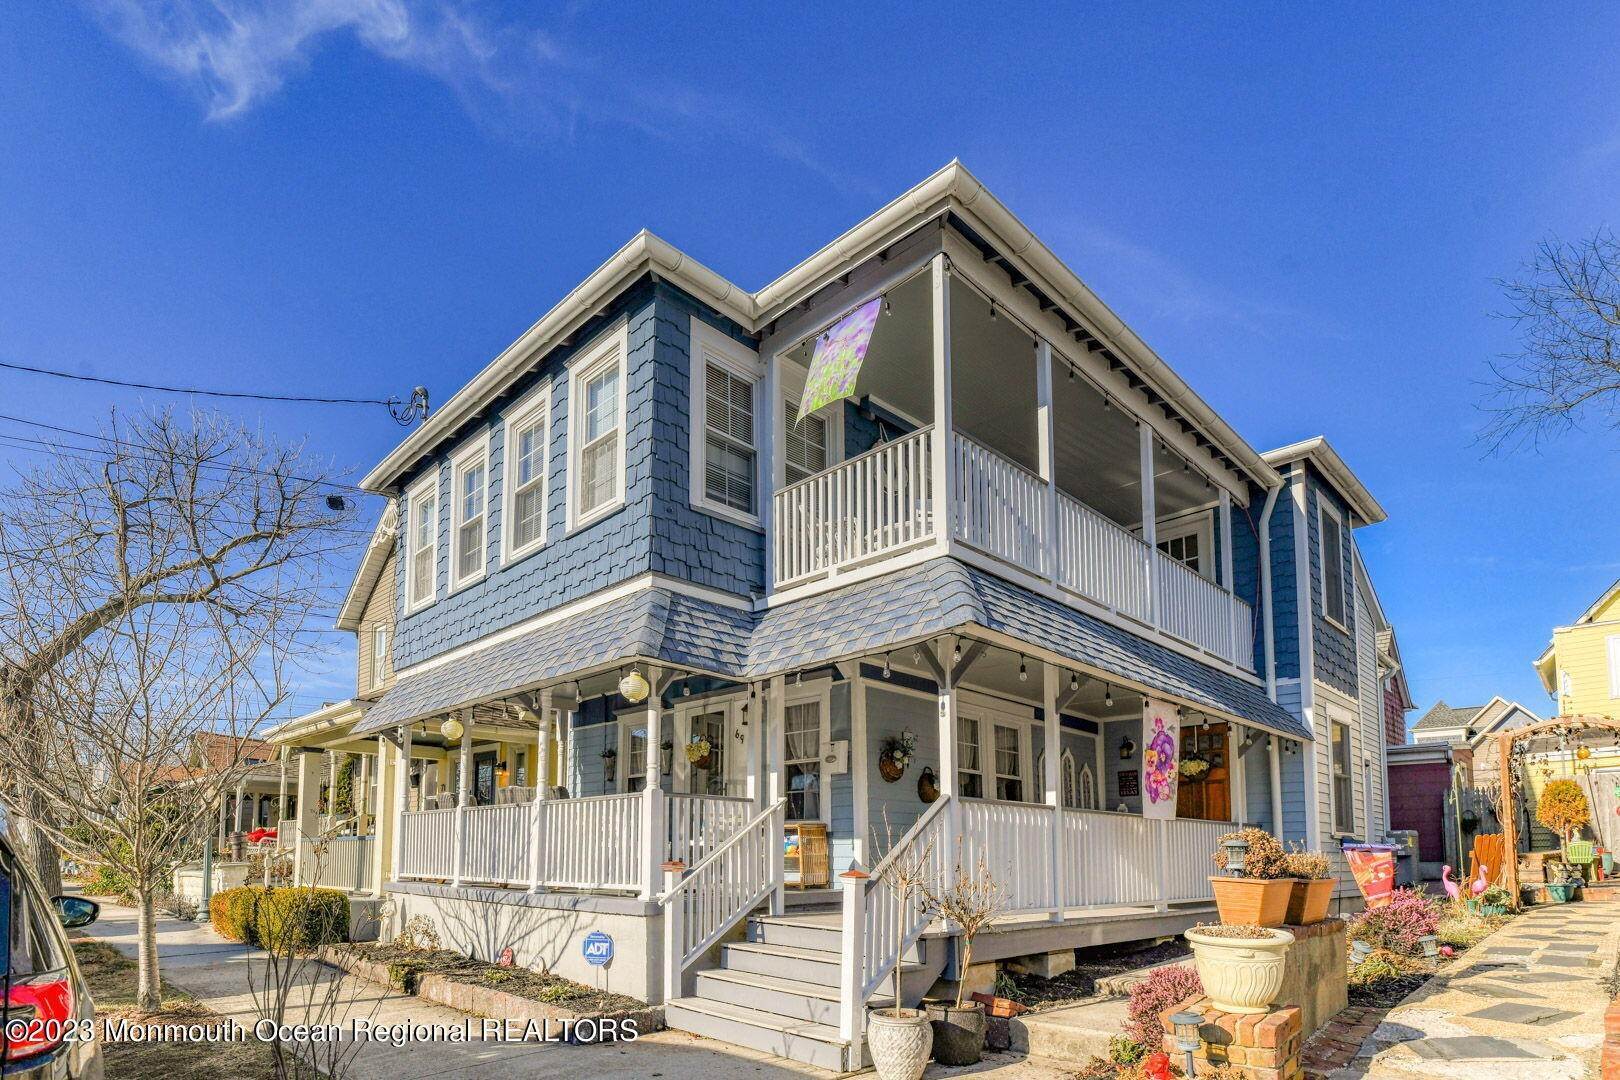 1. Residential Lease at 69 Franklin Avenue 2 Ocean Grove, New Jersey 07756 United States